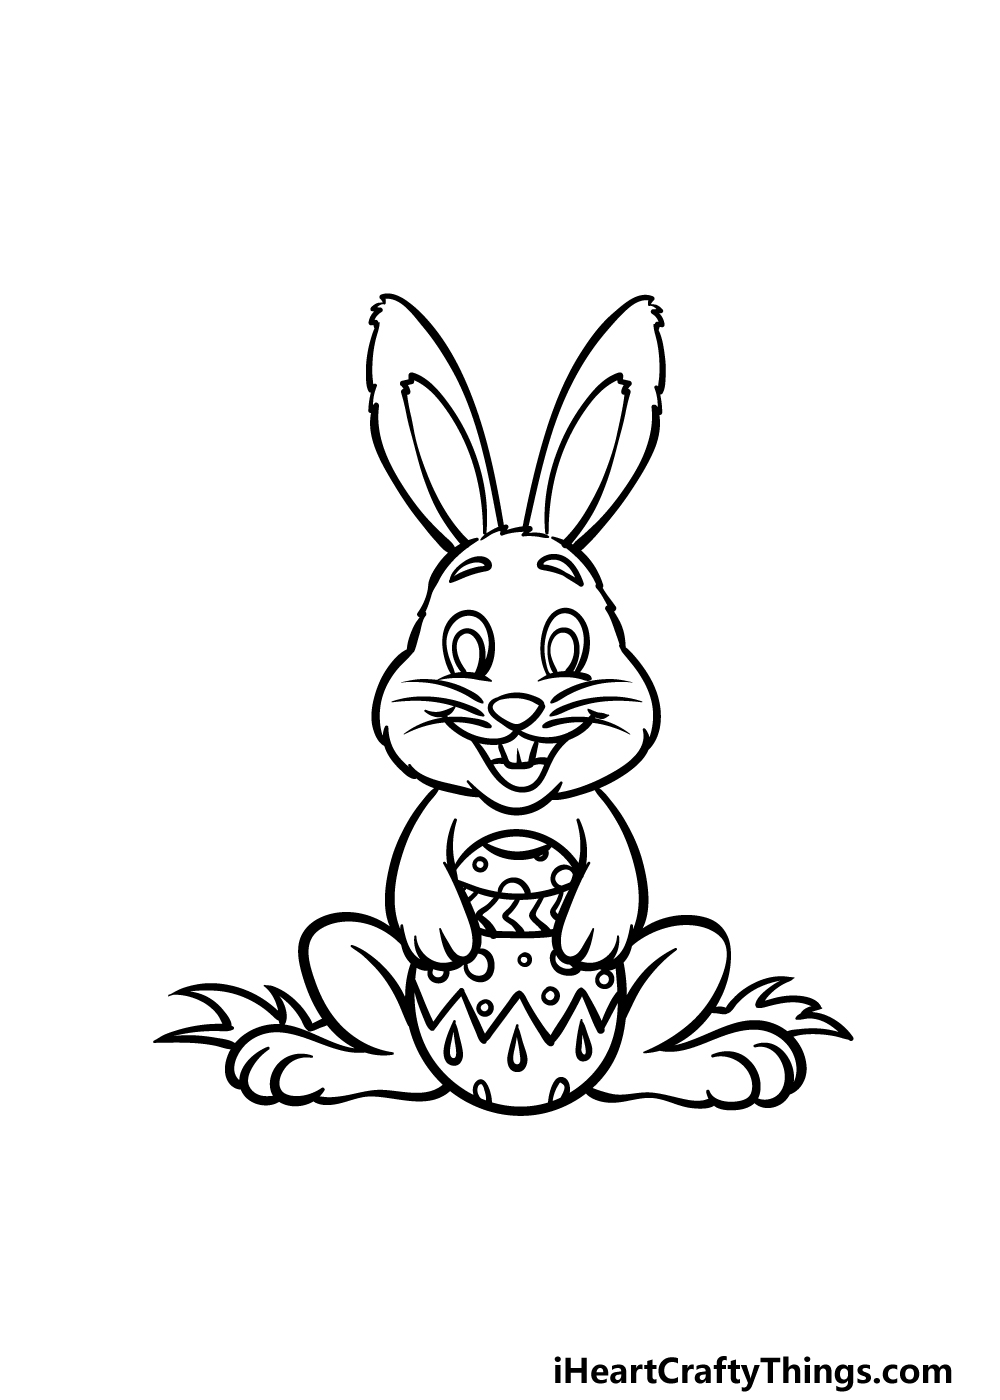 Draw a easter bunny